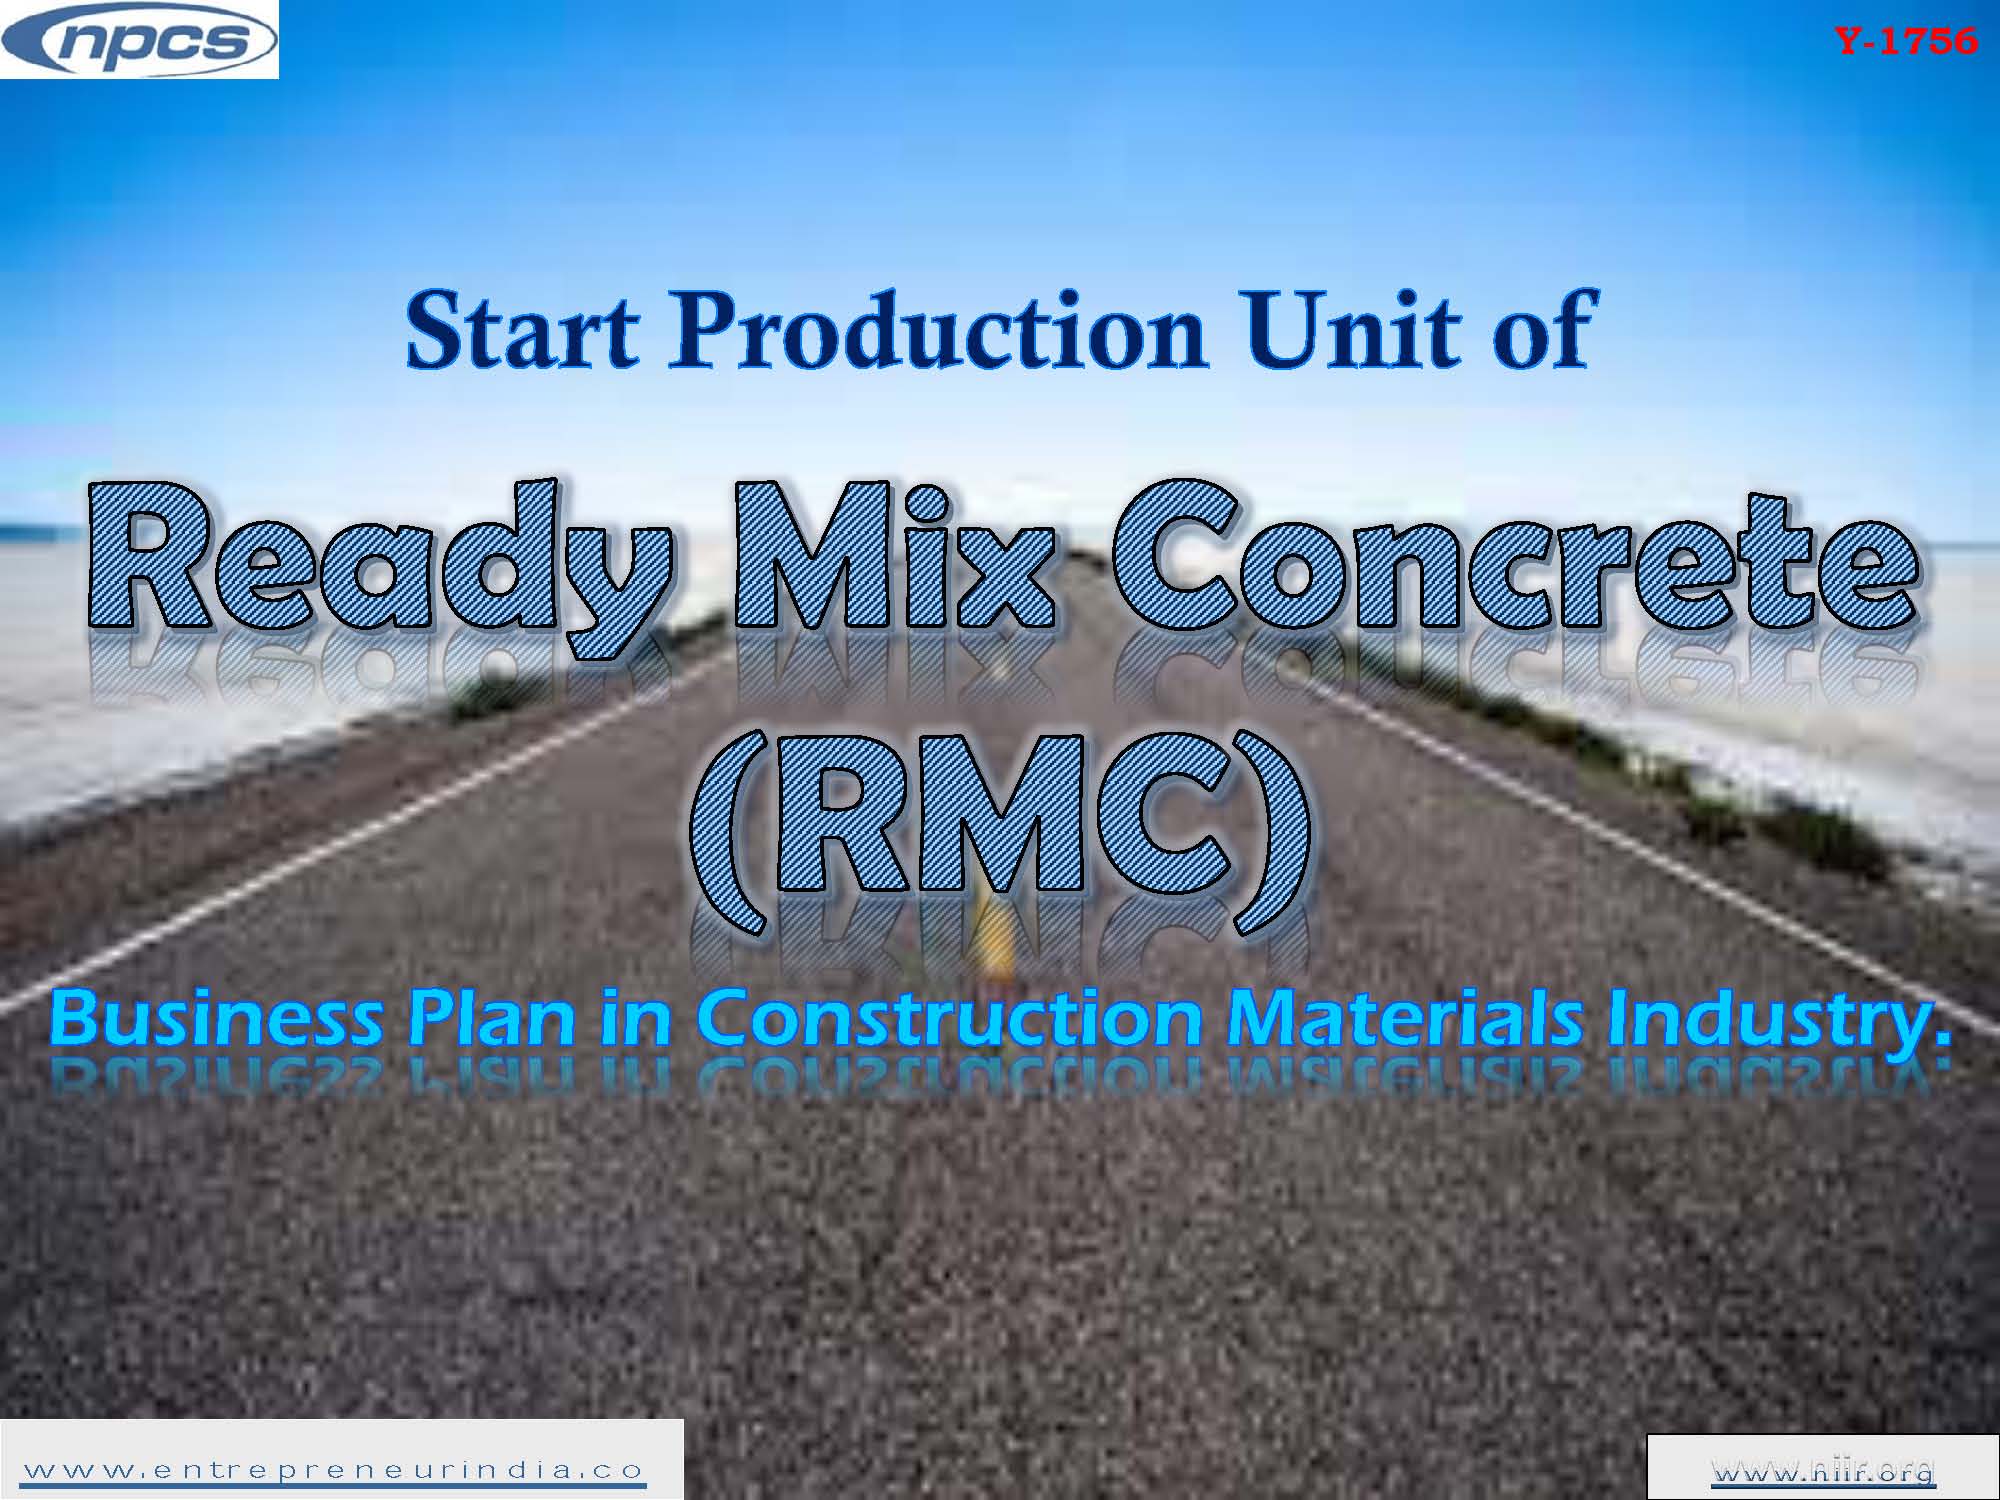 Start Production Unit of Ready Mix Concrete (RMC) Business Plan in Construction Materials Industry